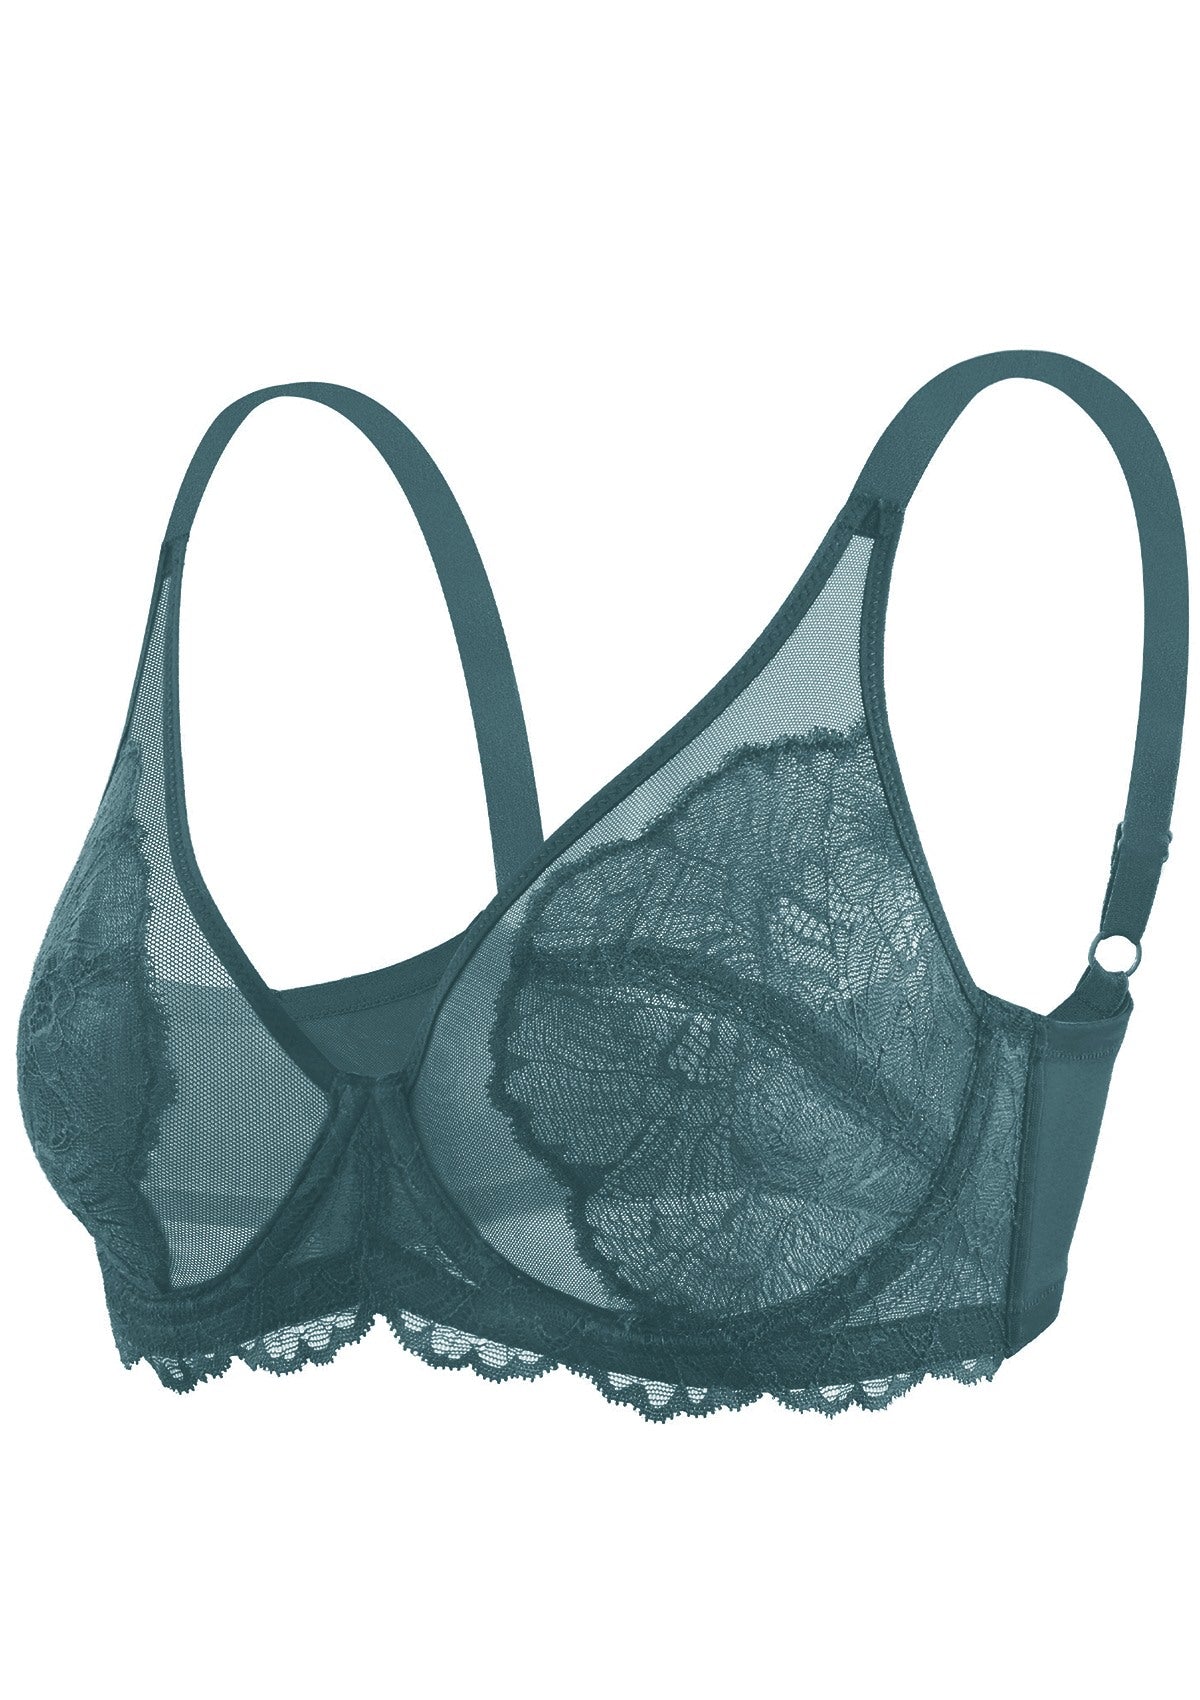 HSIA Blossom Full Figure See-Through Lace Bra For Side And Back Fat - Dark Blue / 40 / DDD/F